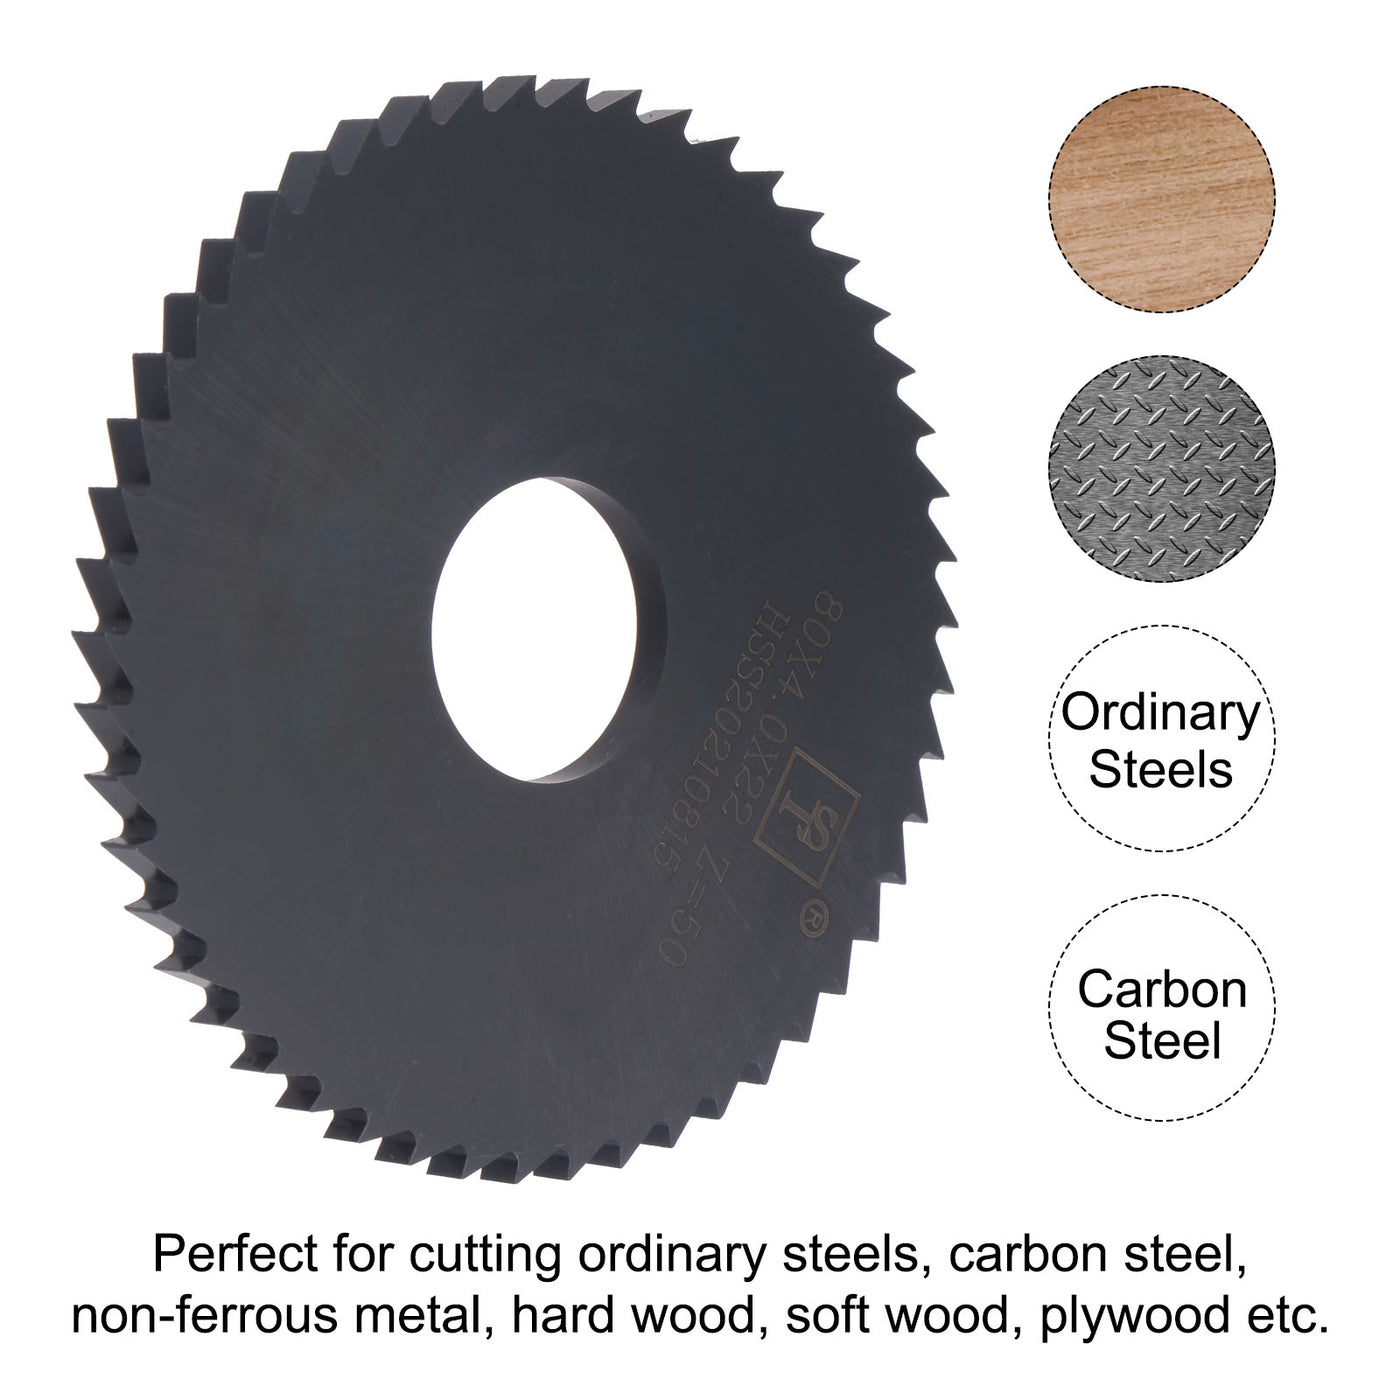 uxcell Uxcell 80mm Dia 22mm Arbor 4mm Thick 50 Tooth Nitriding Circular Saw Blade Cutter